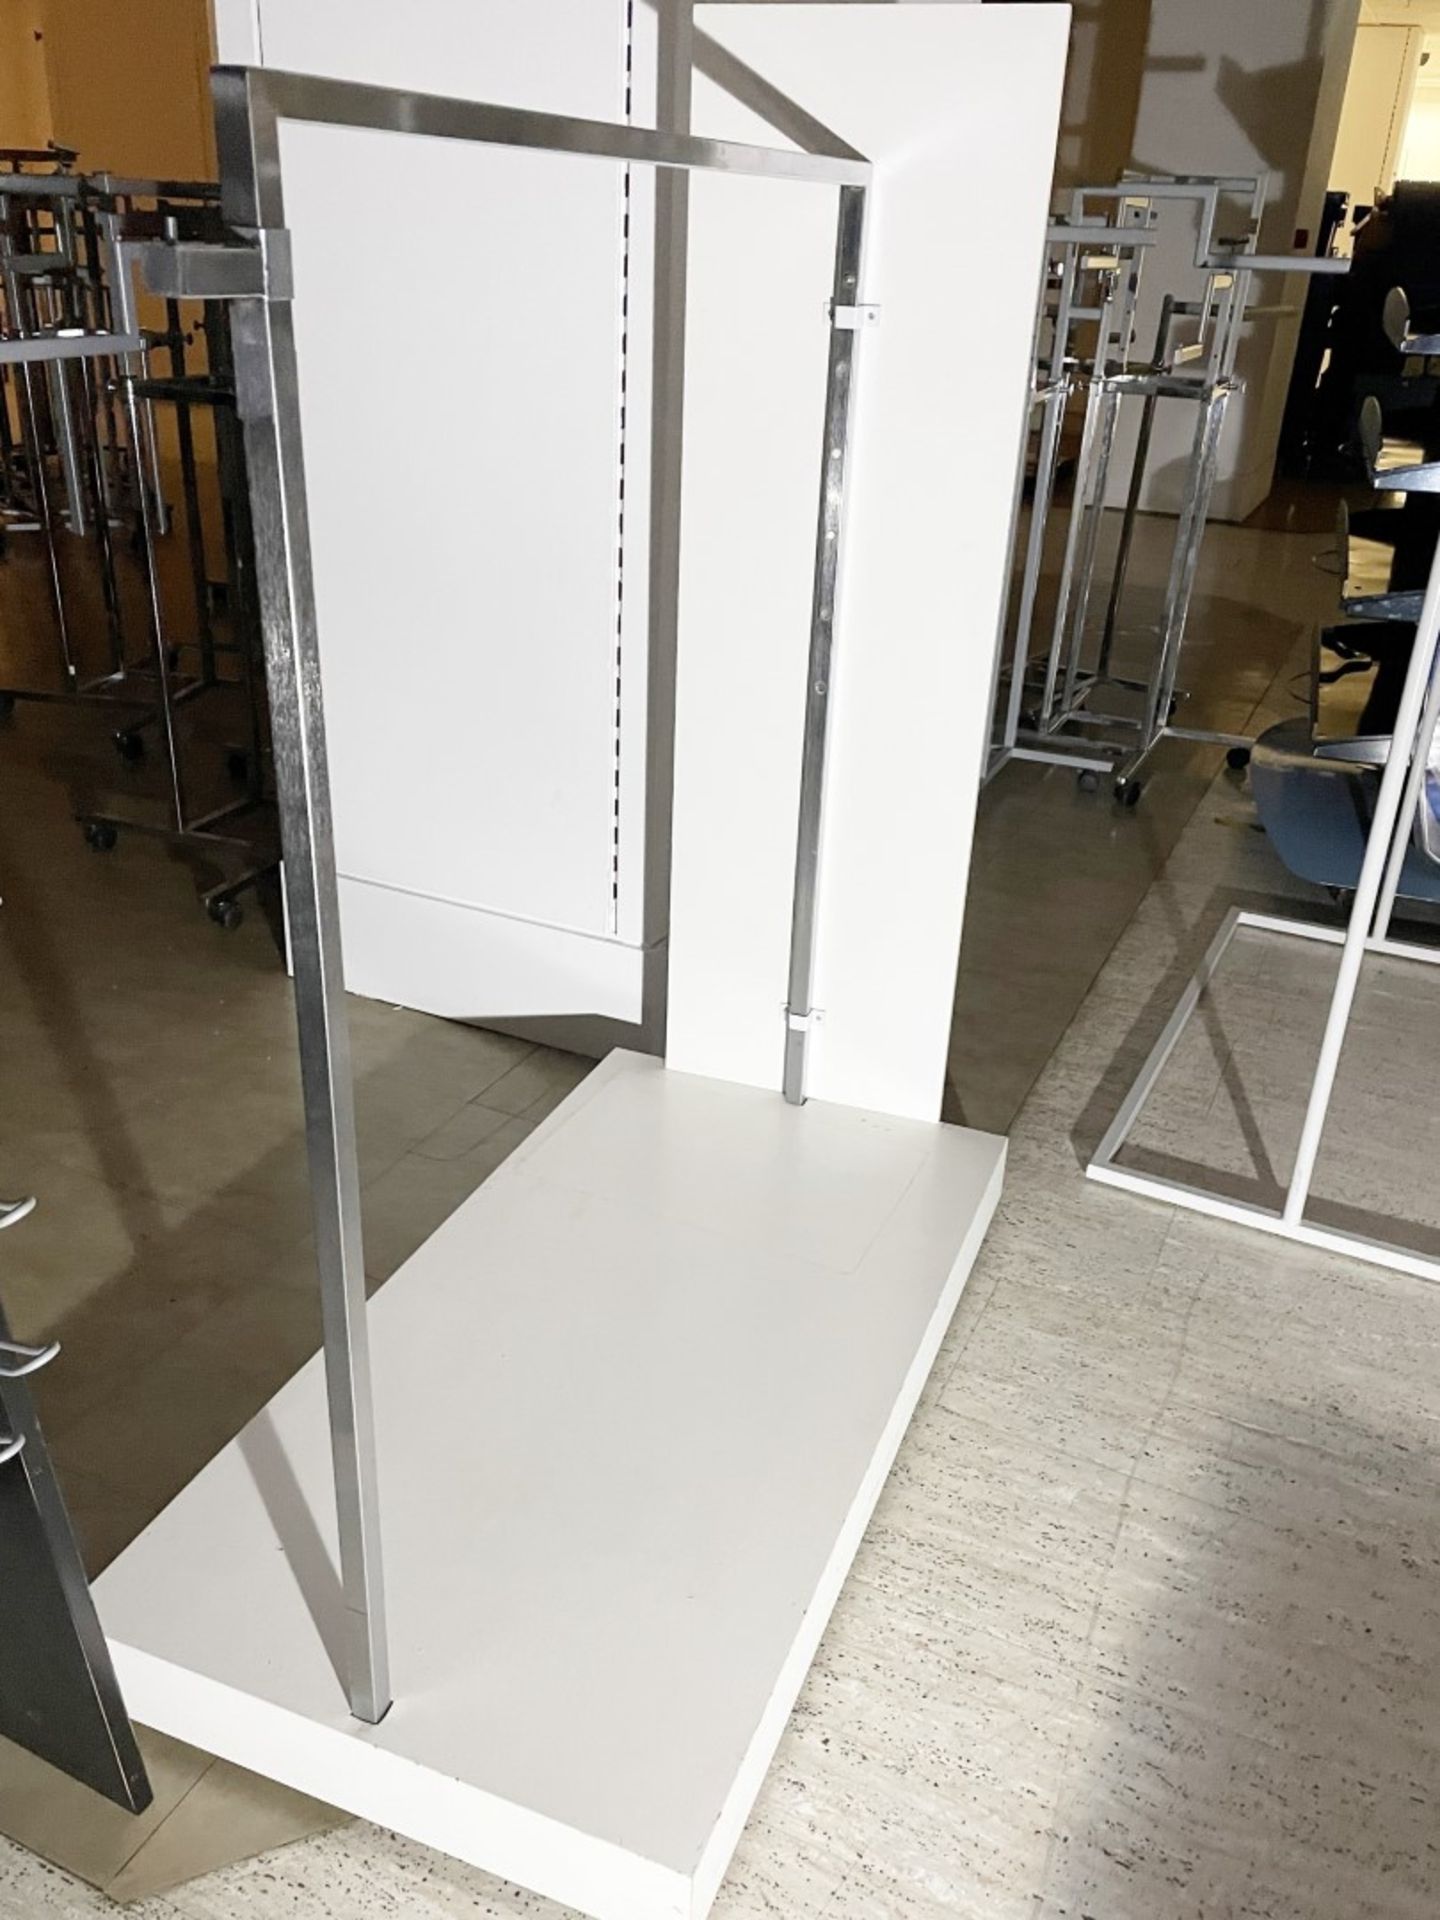 Assorted Collection of 5 x Retail Clothes Rail Stands Including 3 x White Four Arm Rails and 2 x - Image 4 of 10